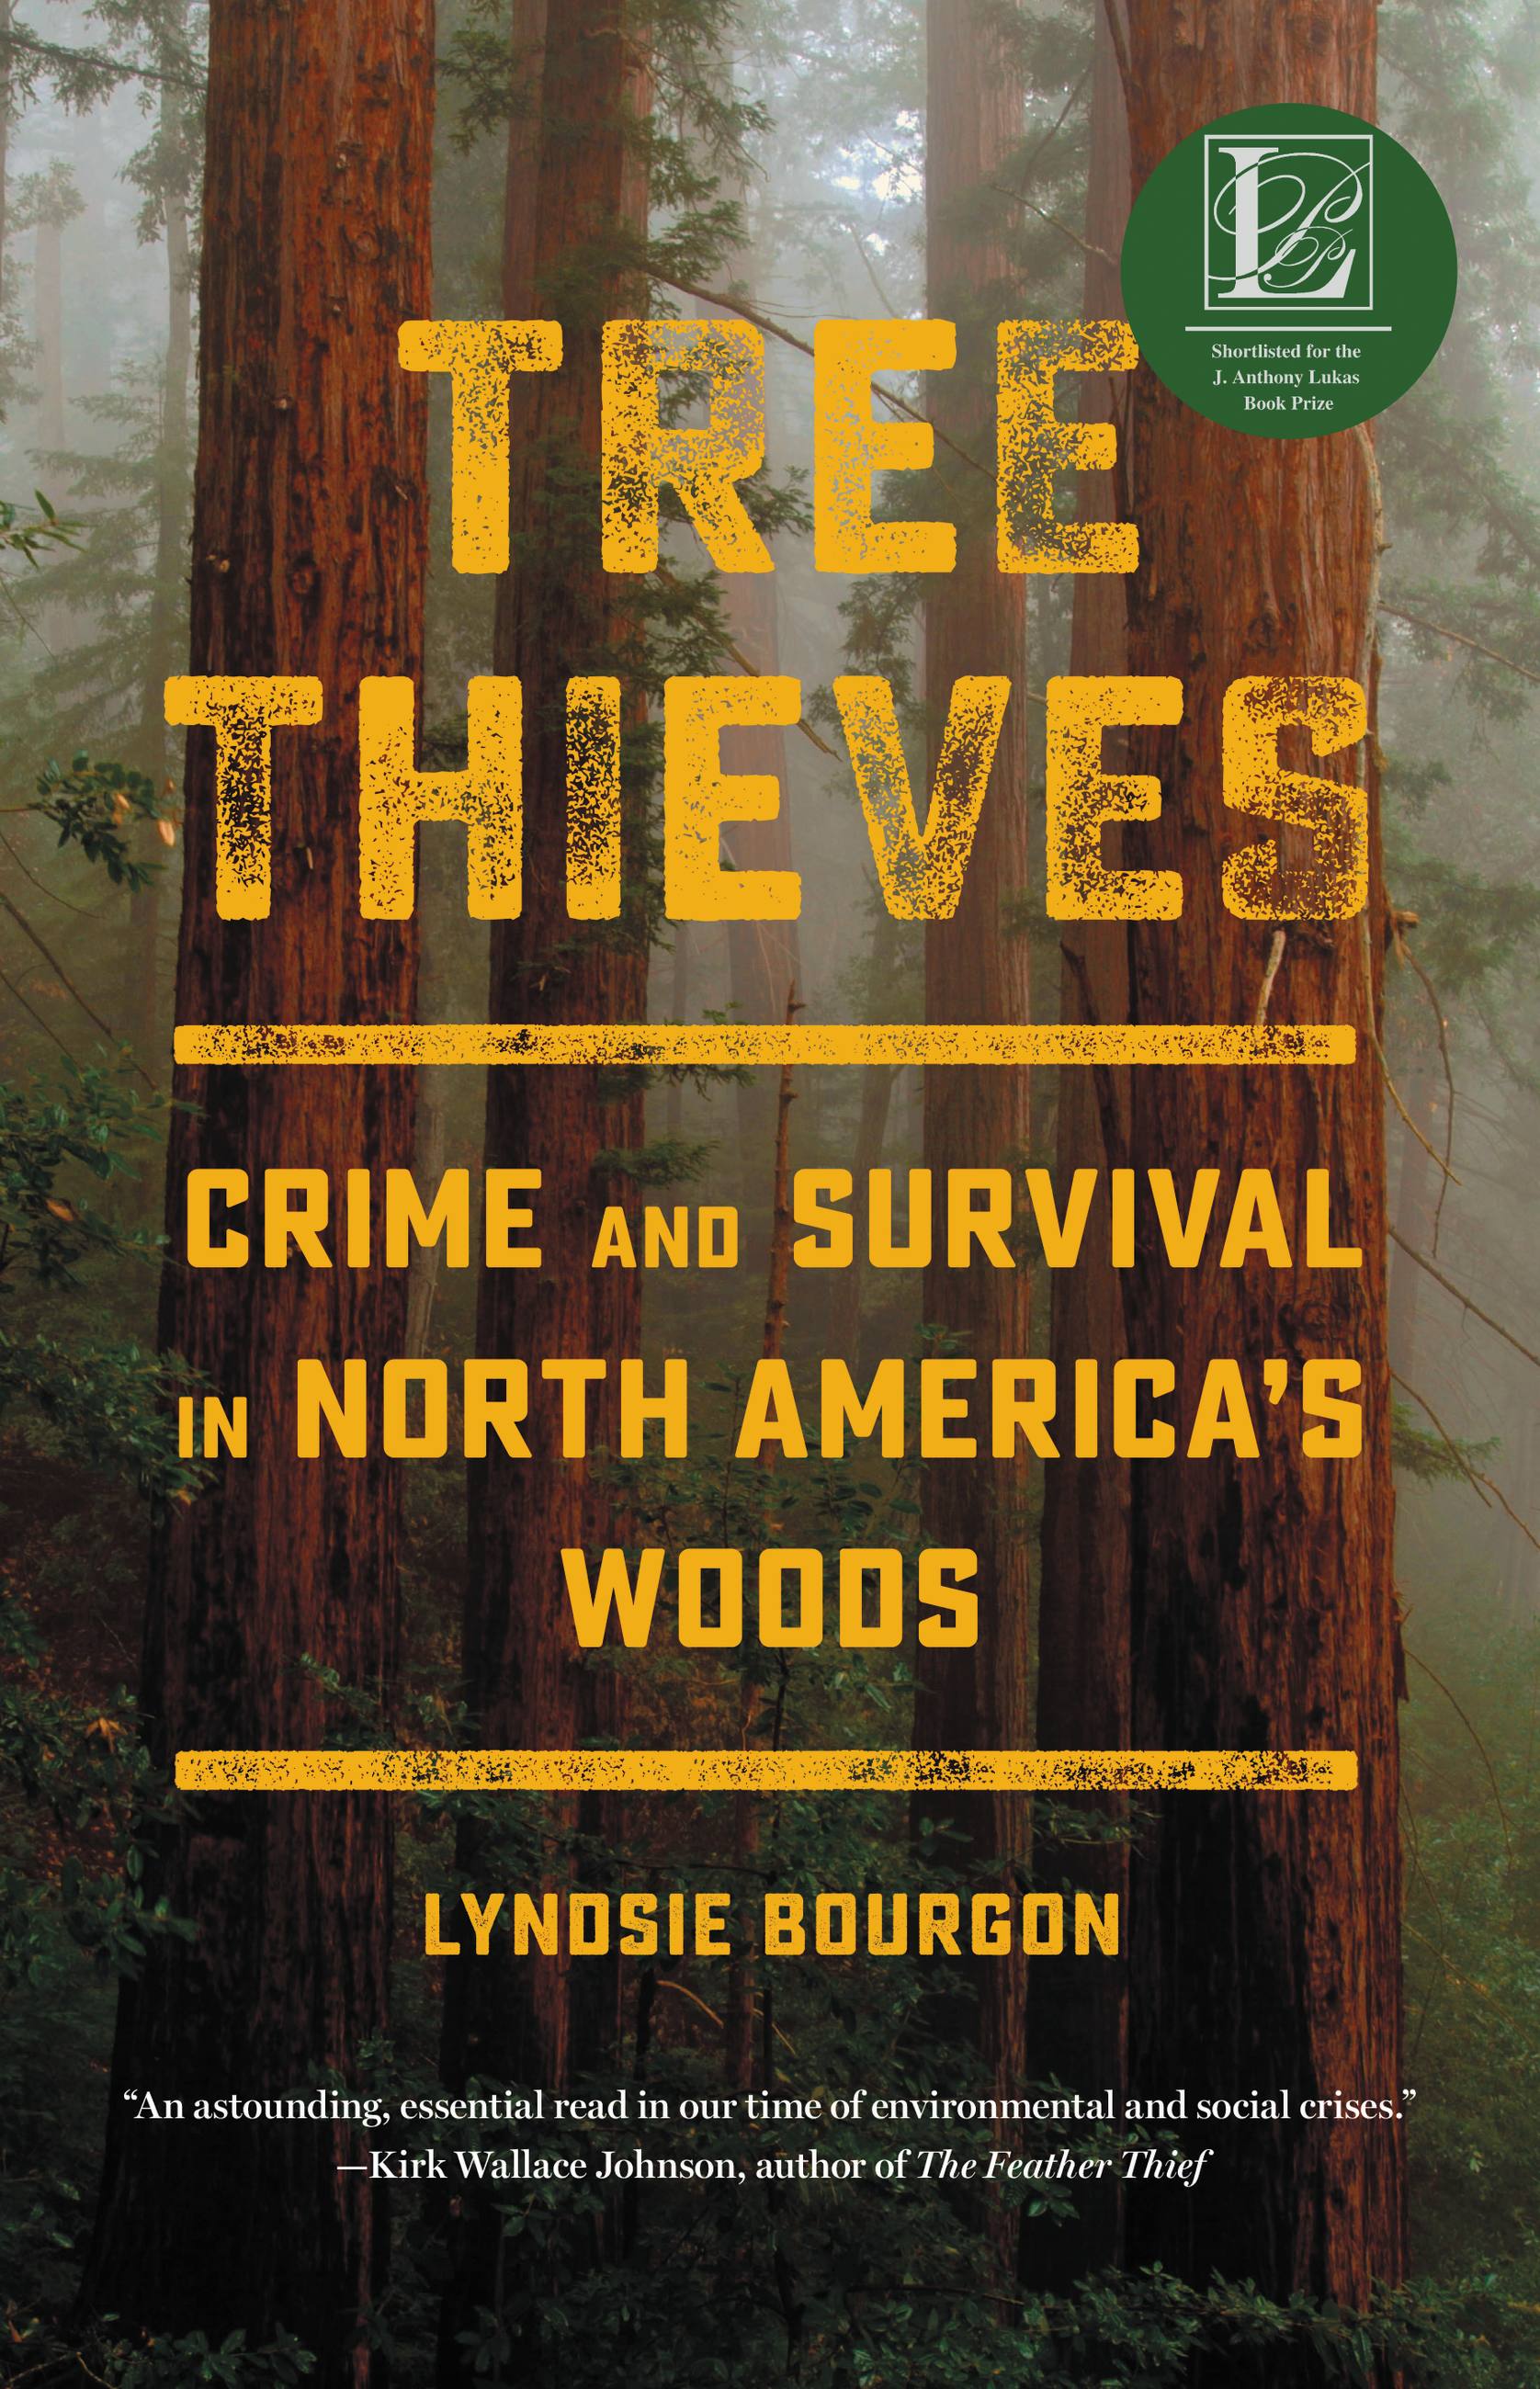 Tree Thieves by Lyndsie Bourgon Hachette Book Group